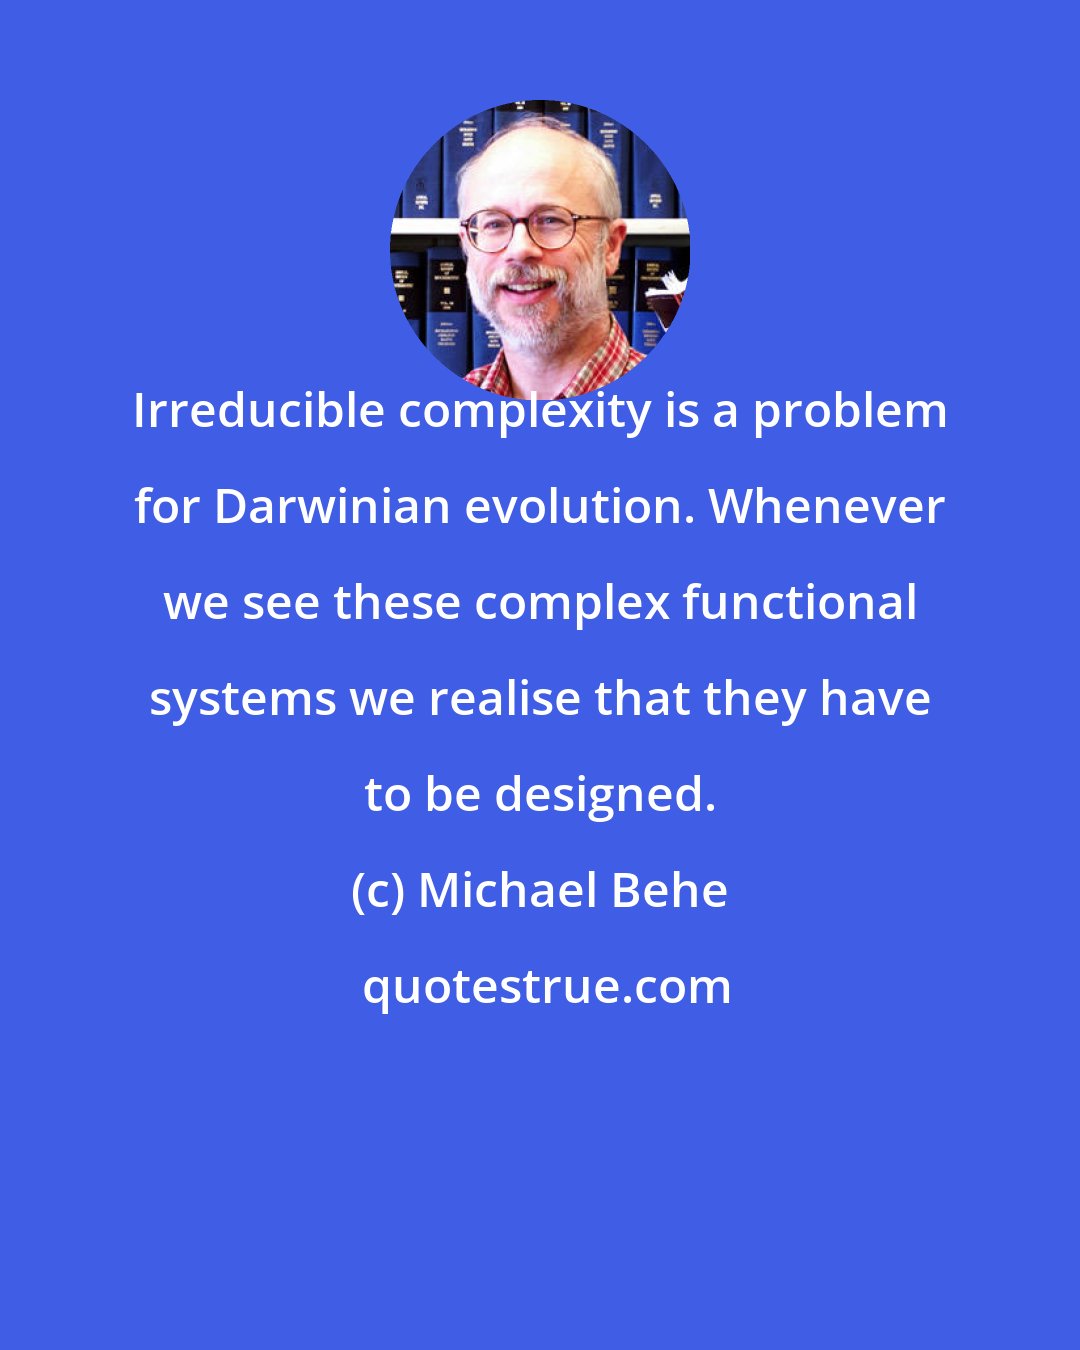 Michael Behe: Irreducible complexity is a problem for Darwinian evolution. Whenever we see these complex functional systems we realise that they have to be designed.